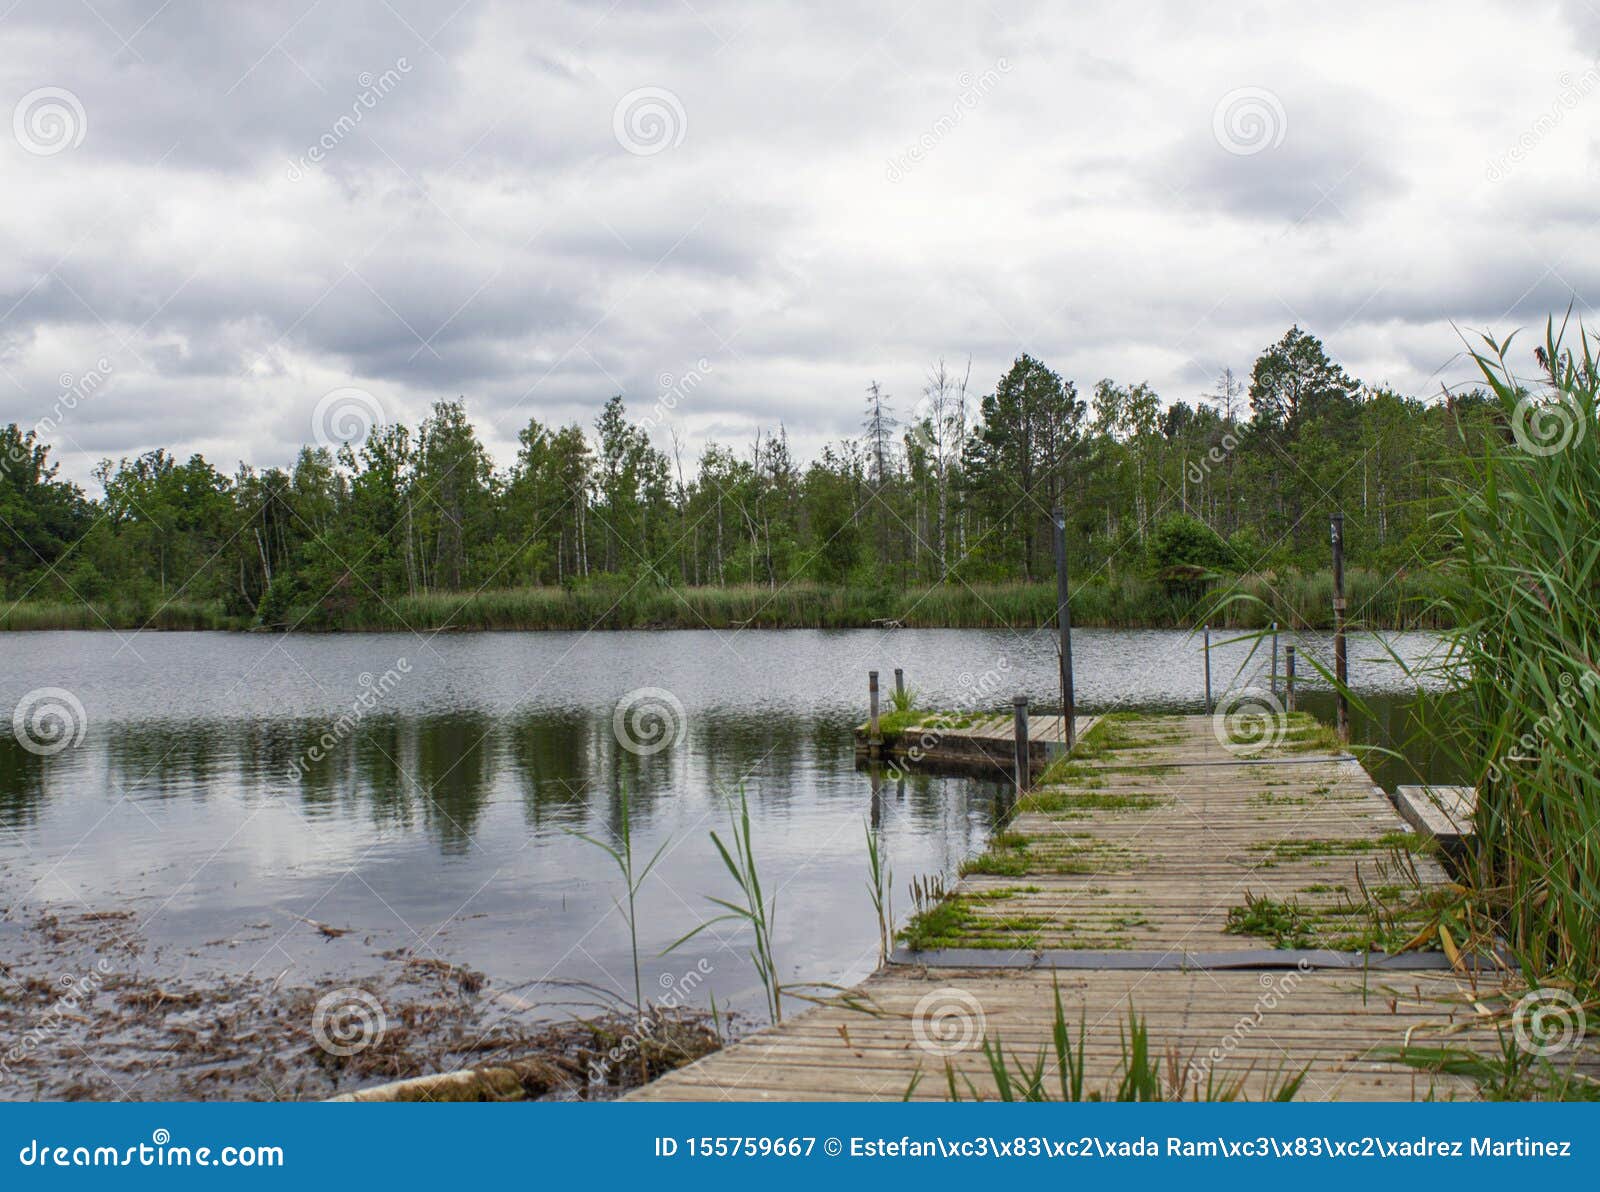 romantic landscape of photography of forest and lake in skovde sweden.